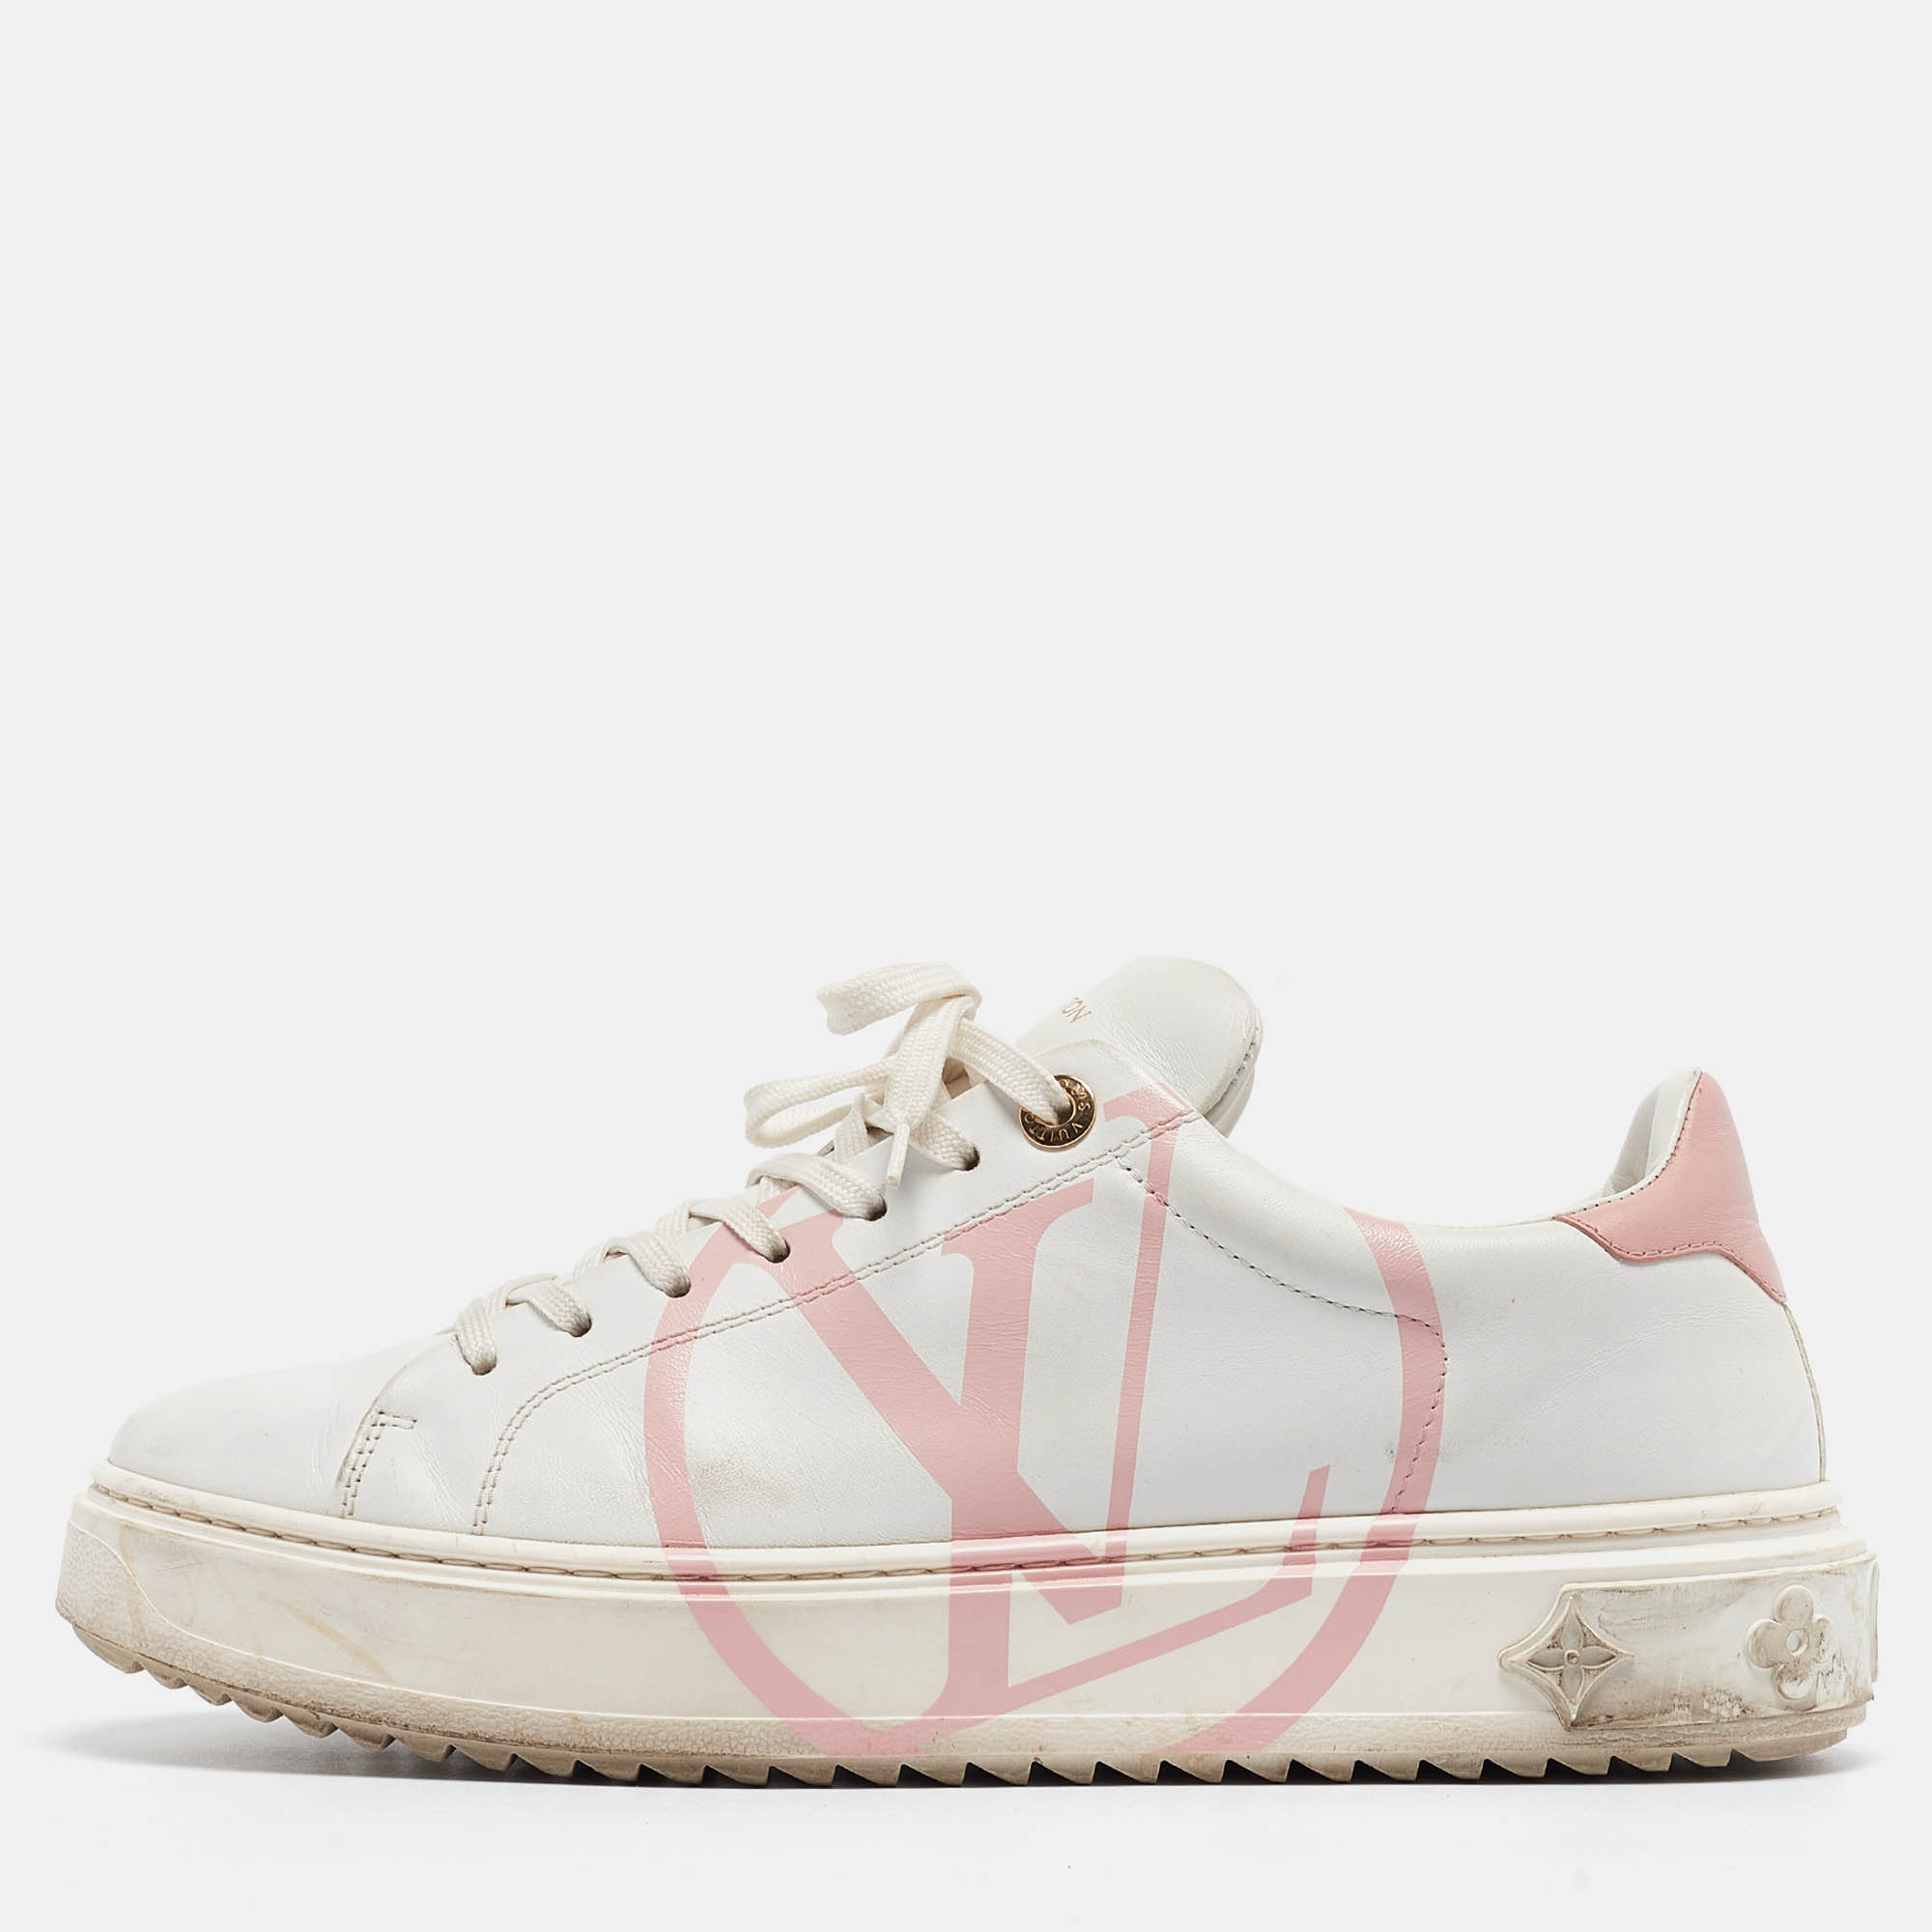 Louis vuitton white/pink leather time out sneakers size 41